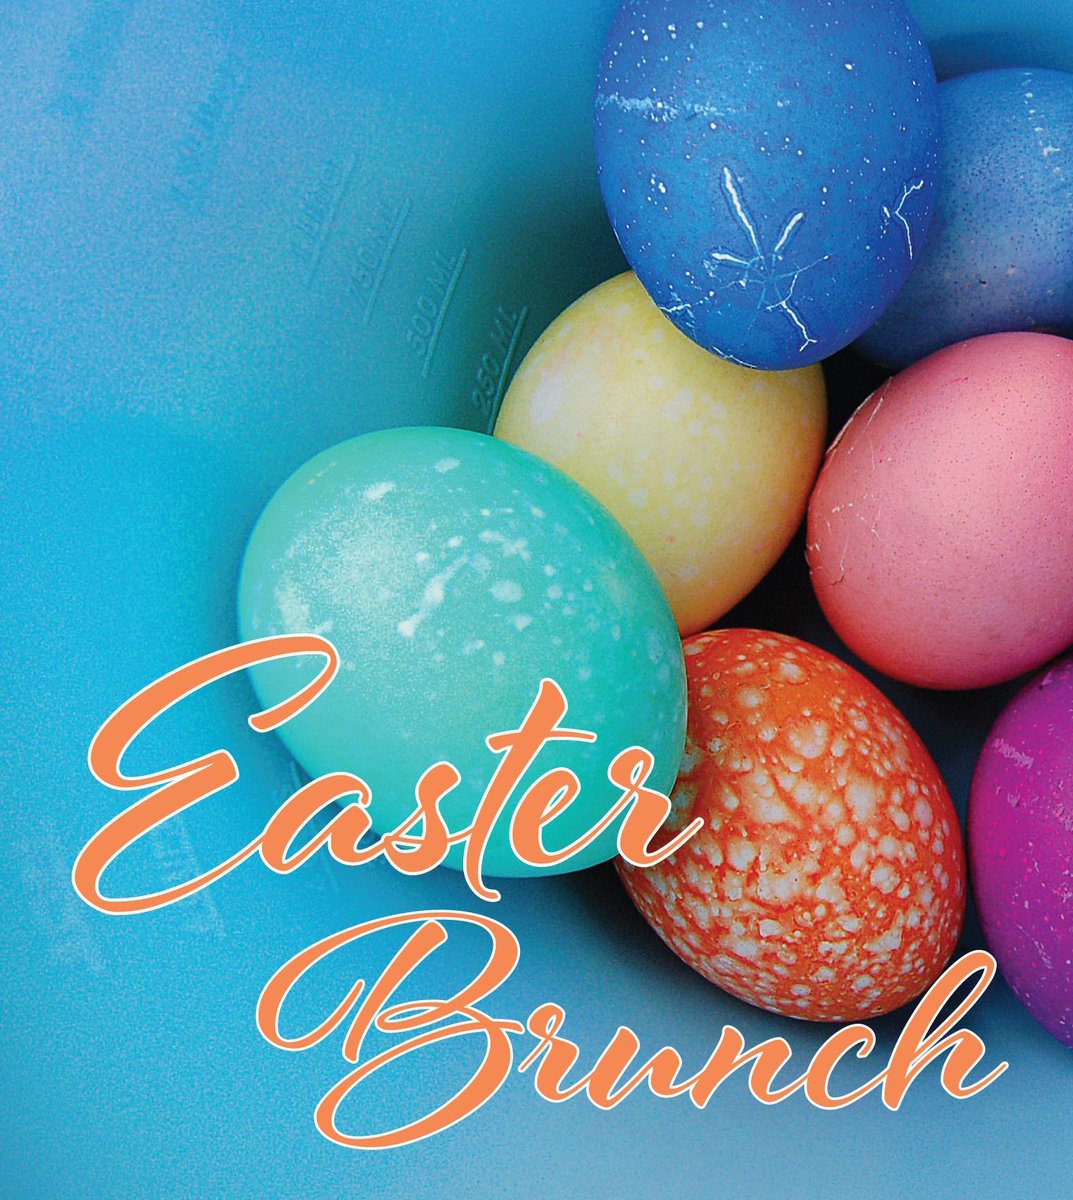 11AM - 3PM April 21 - celebrate with a delicious #Easter #Brunch @MiradoroResto and a complimentary Easter Egg Hunt @TinhornCreek call 250-498-3742 or email info@miradoro.ca to book #winerydining #foodlover #BCwine